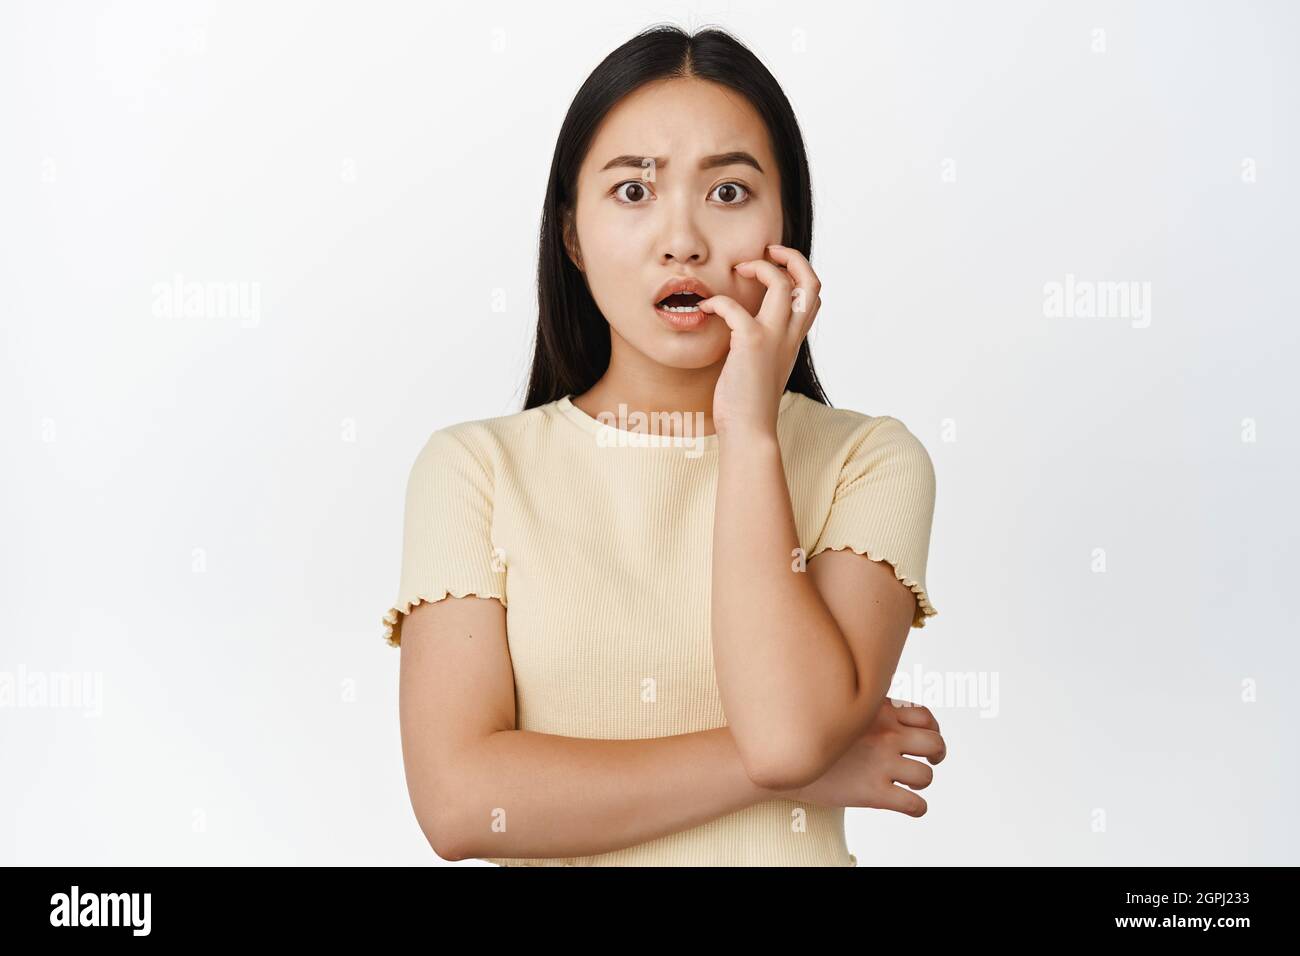 Anxious asian girl biting fingernails and looking worried, being in trouble, panicking, standing over white background Stock Photo